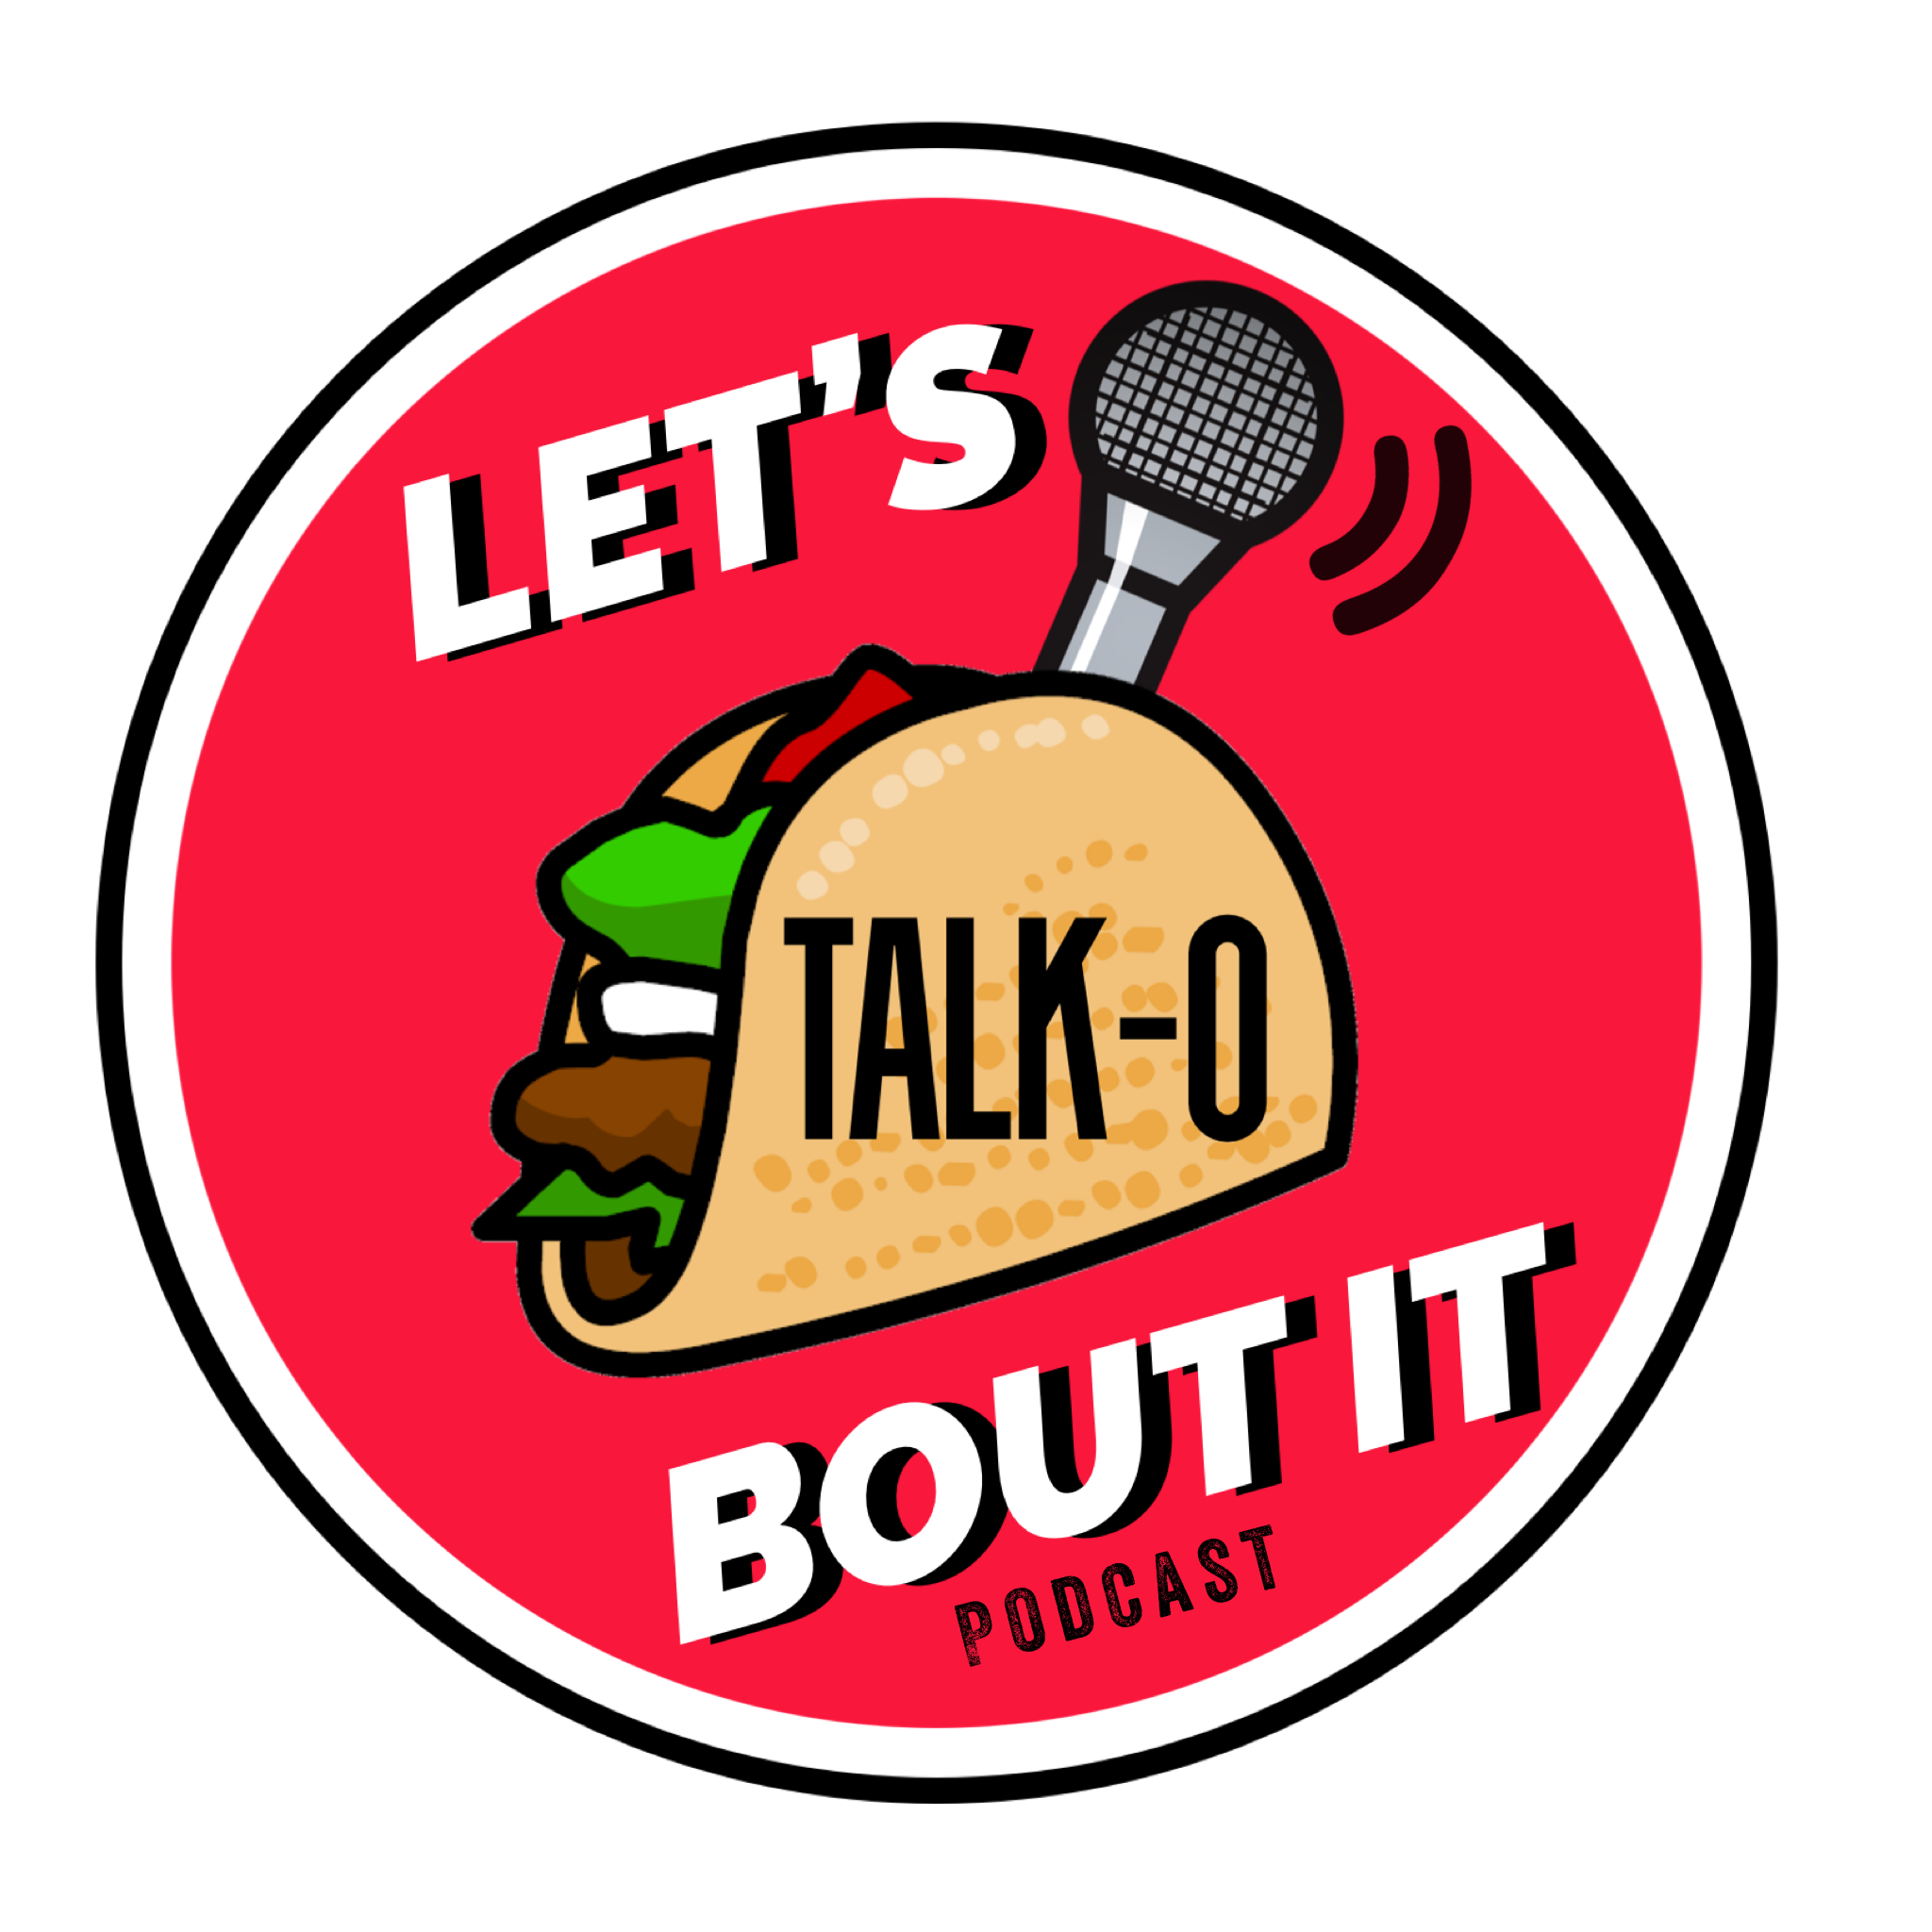 Let's talk-o bout it's Podcast